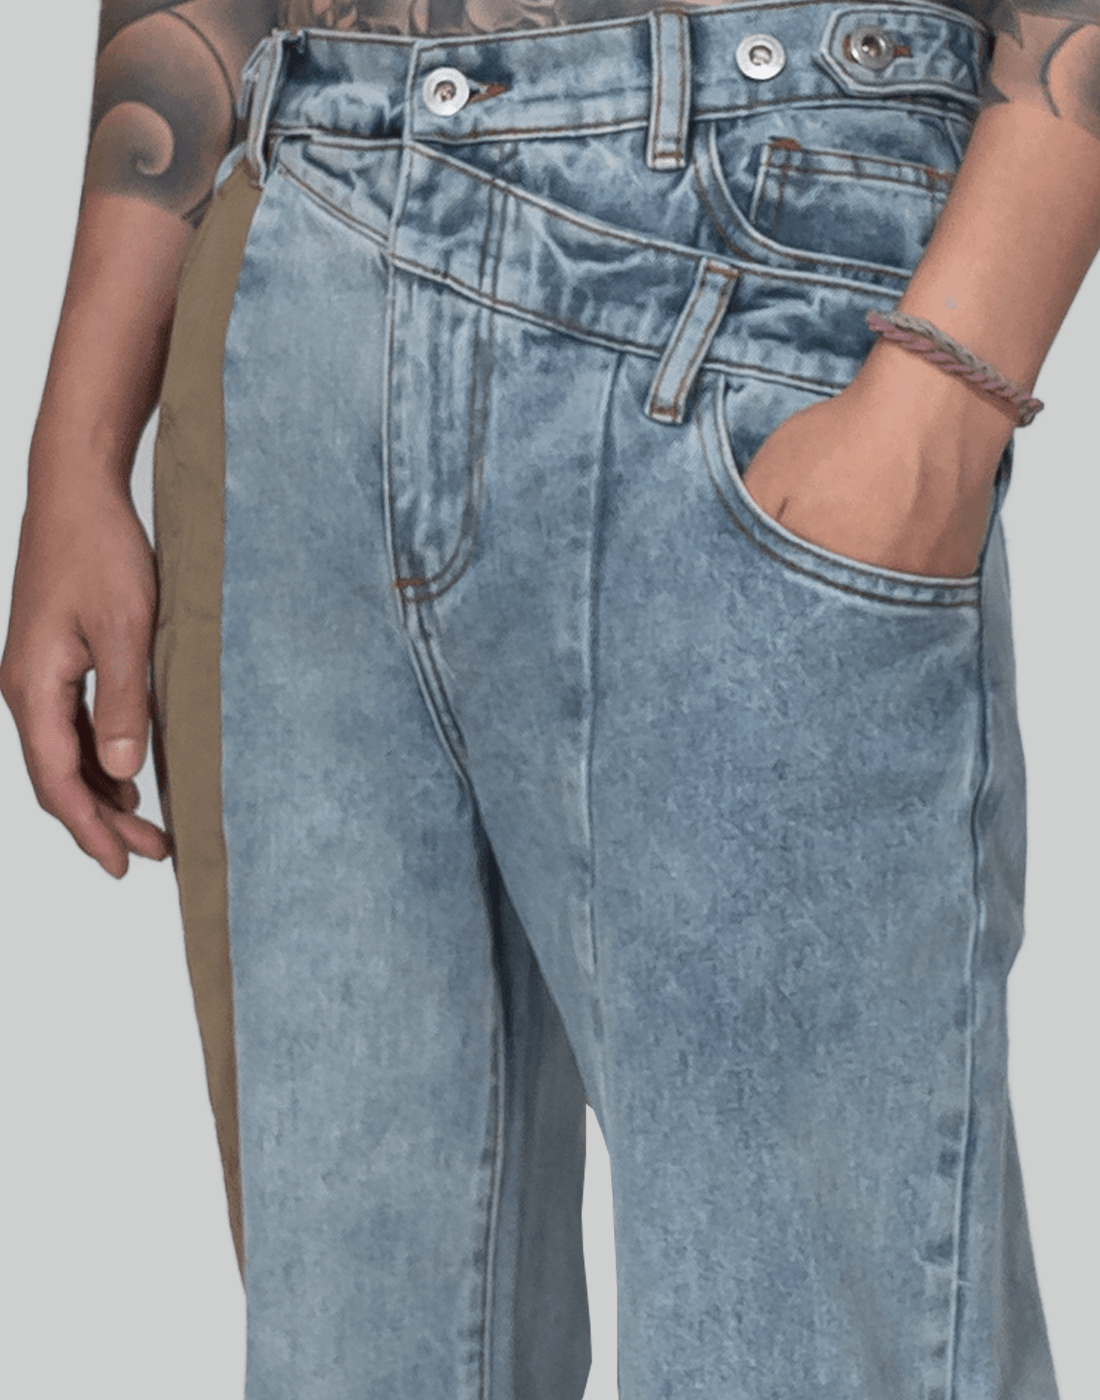 FENG CHEN WANG PHOENIX EMBROIDERY PANELLED JEANS - 082plus